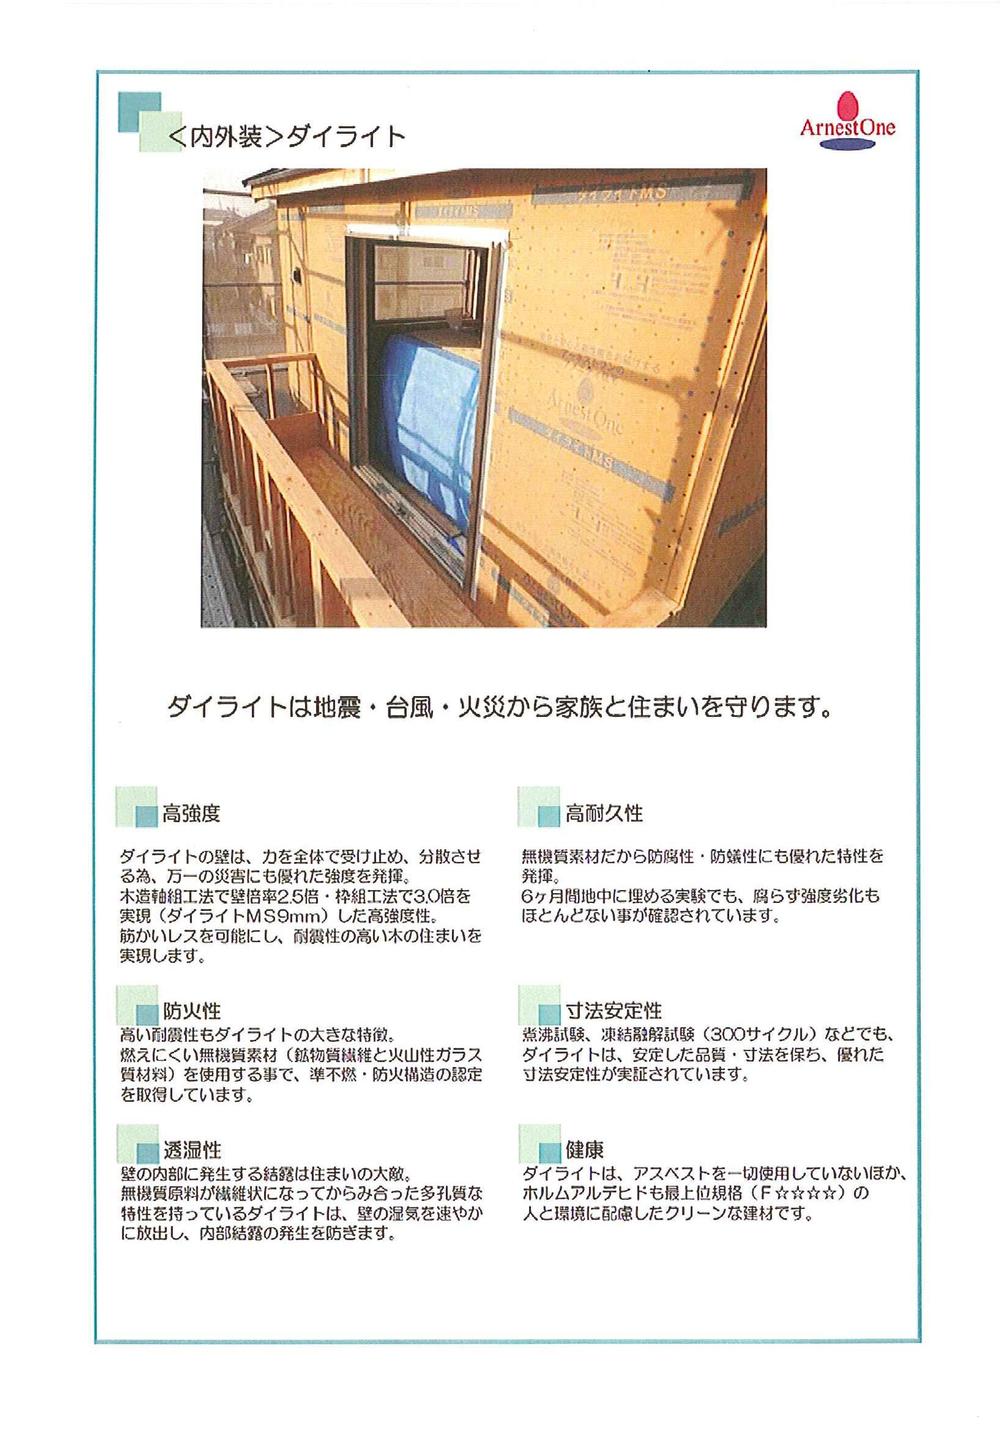 Construction ・ Construction method ・ specification. Strong Dairaito method to earthquake